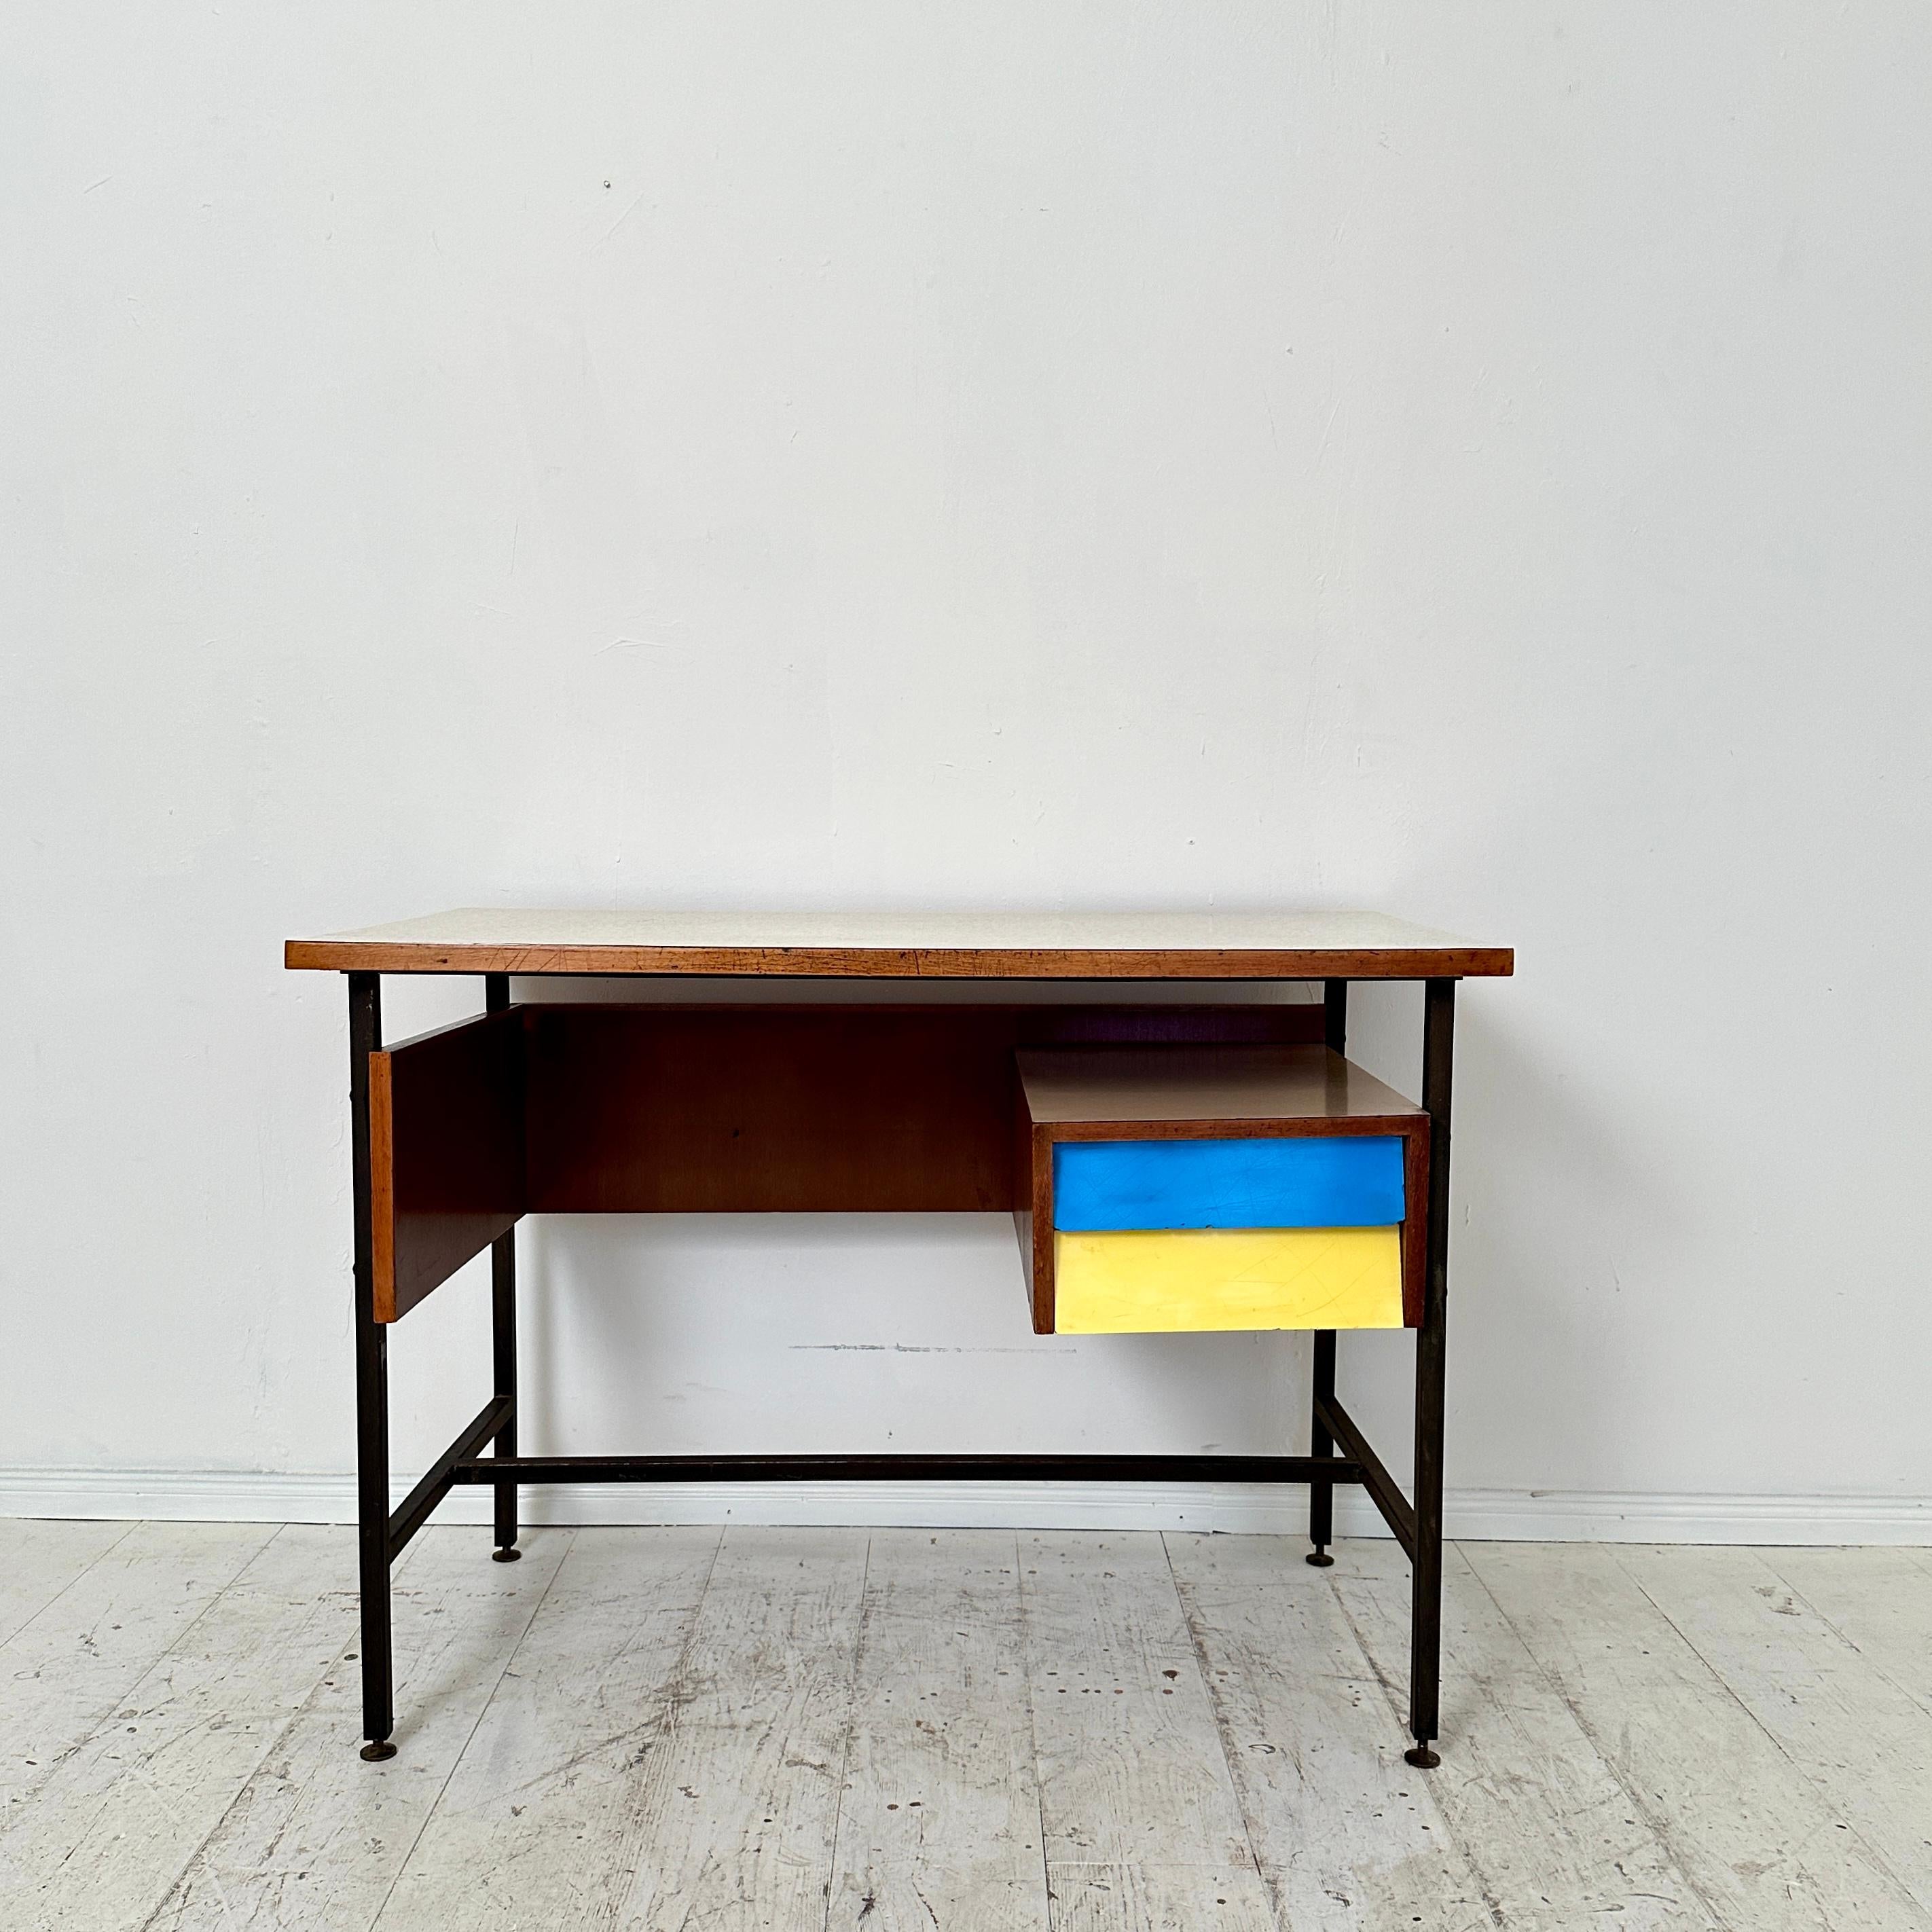 A charming relic from the mid-20th century, this Small Italian Desk embodies the essence of mid-century design with a perfect blend of metal, walnut, and formica. Crafted around 1950, its compact form exudes a functional elegance that defined the